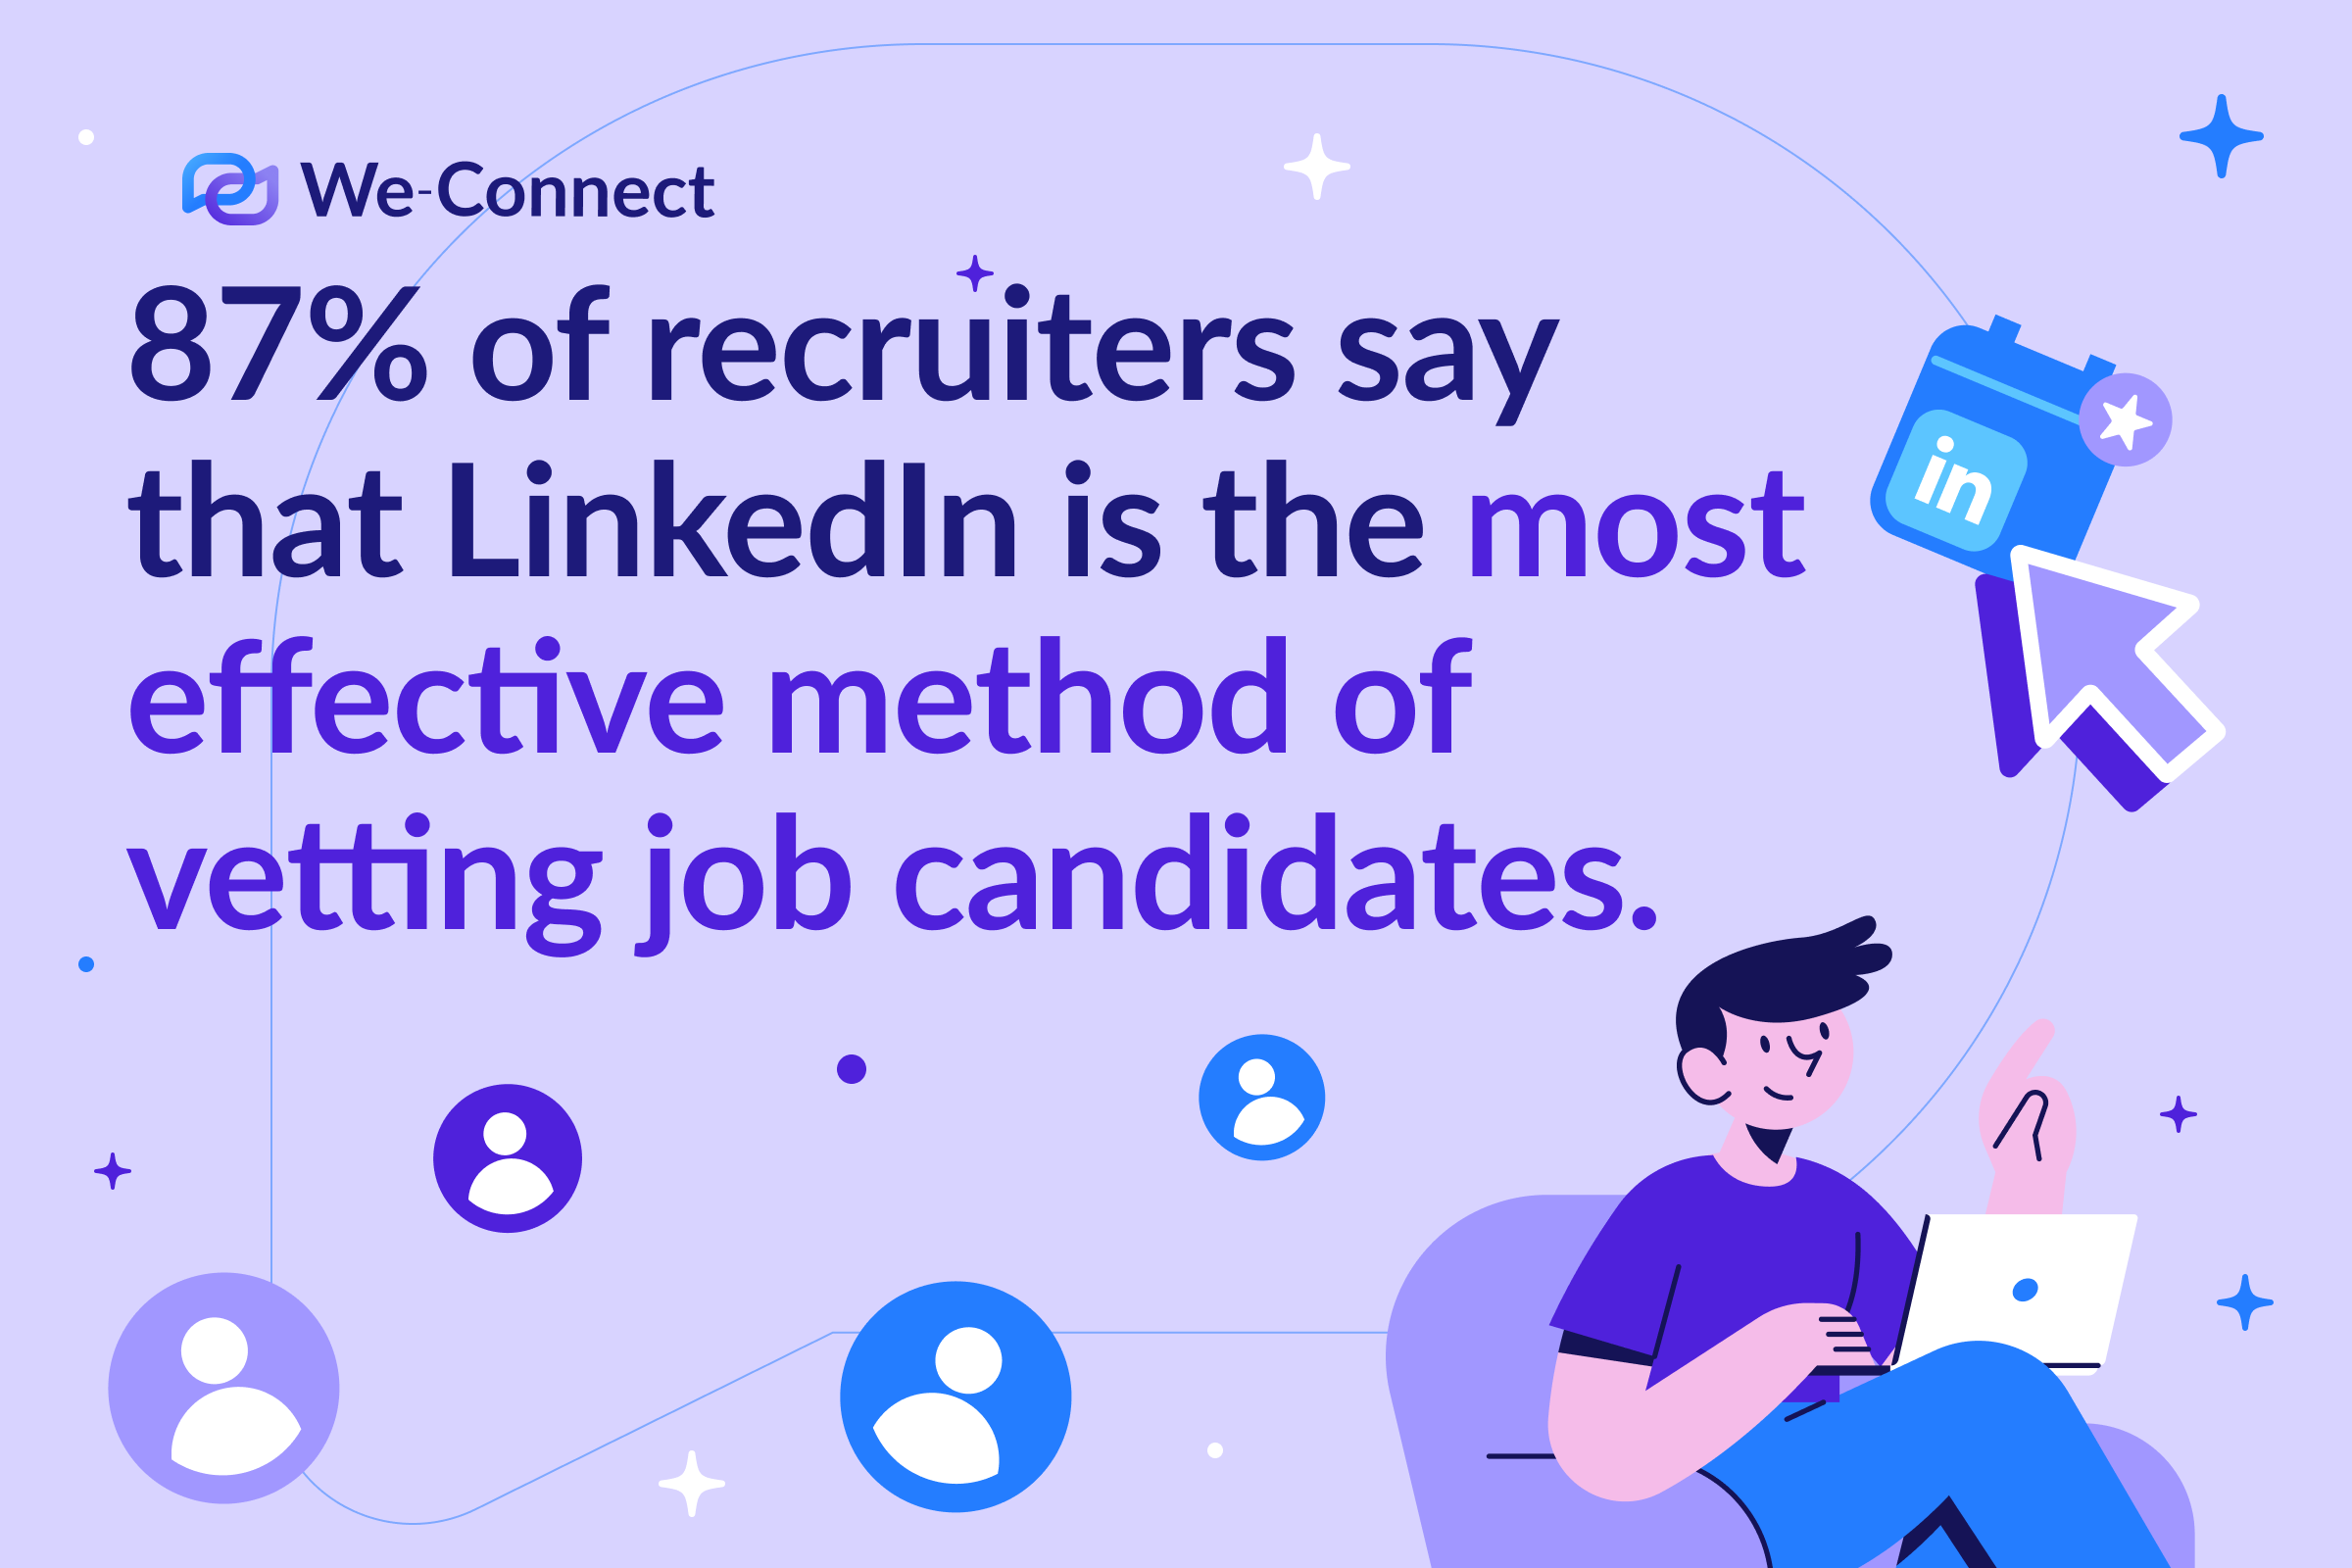 87% of recruiters say that LinkedIn is the most effective method of vetting job candidates